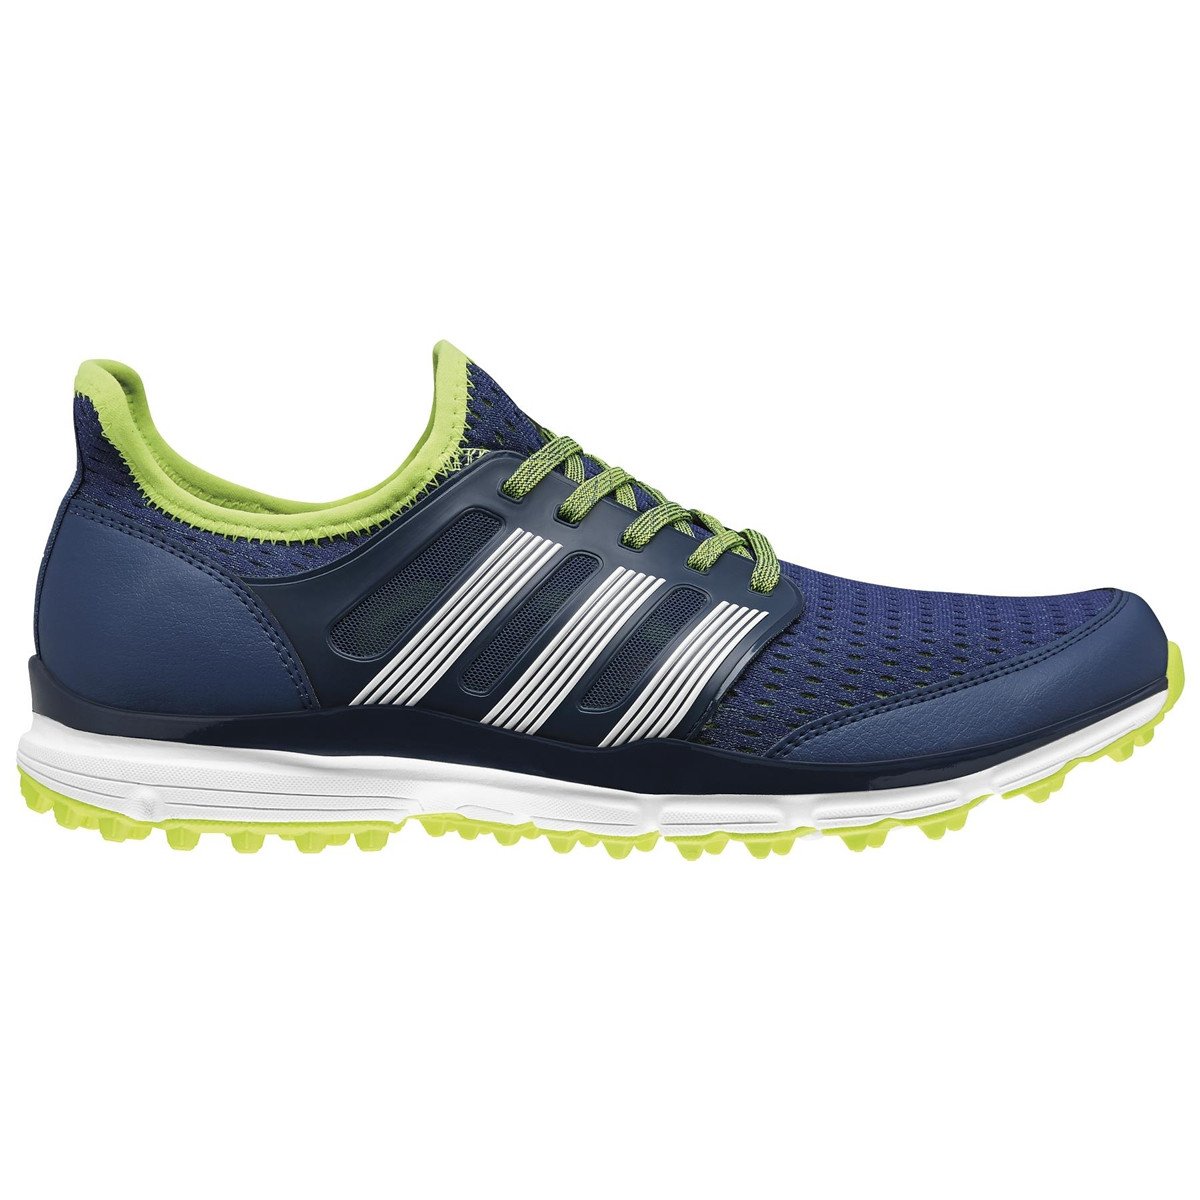 Adidas Climacool Golf Shoes - Discount Golf Shoes - Hurricane Golf